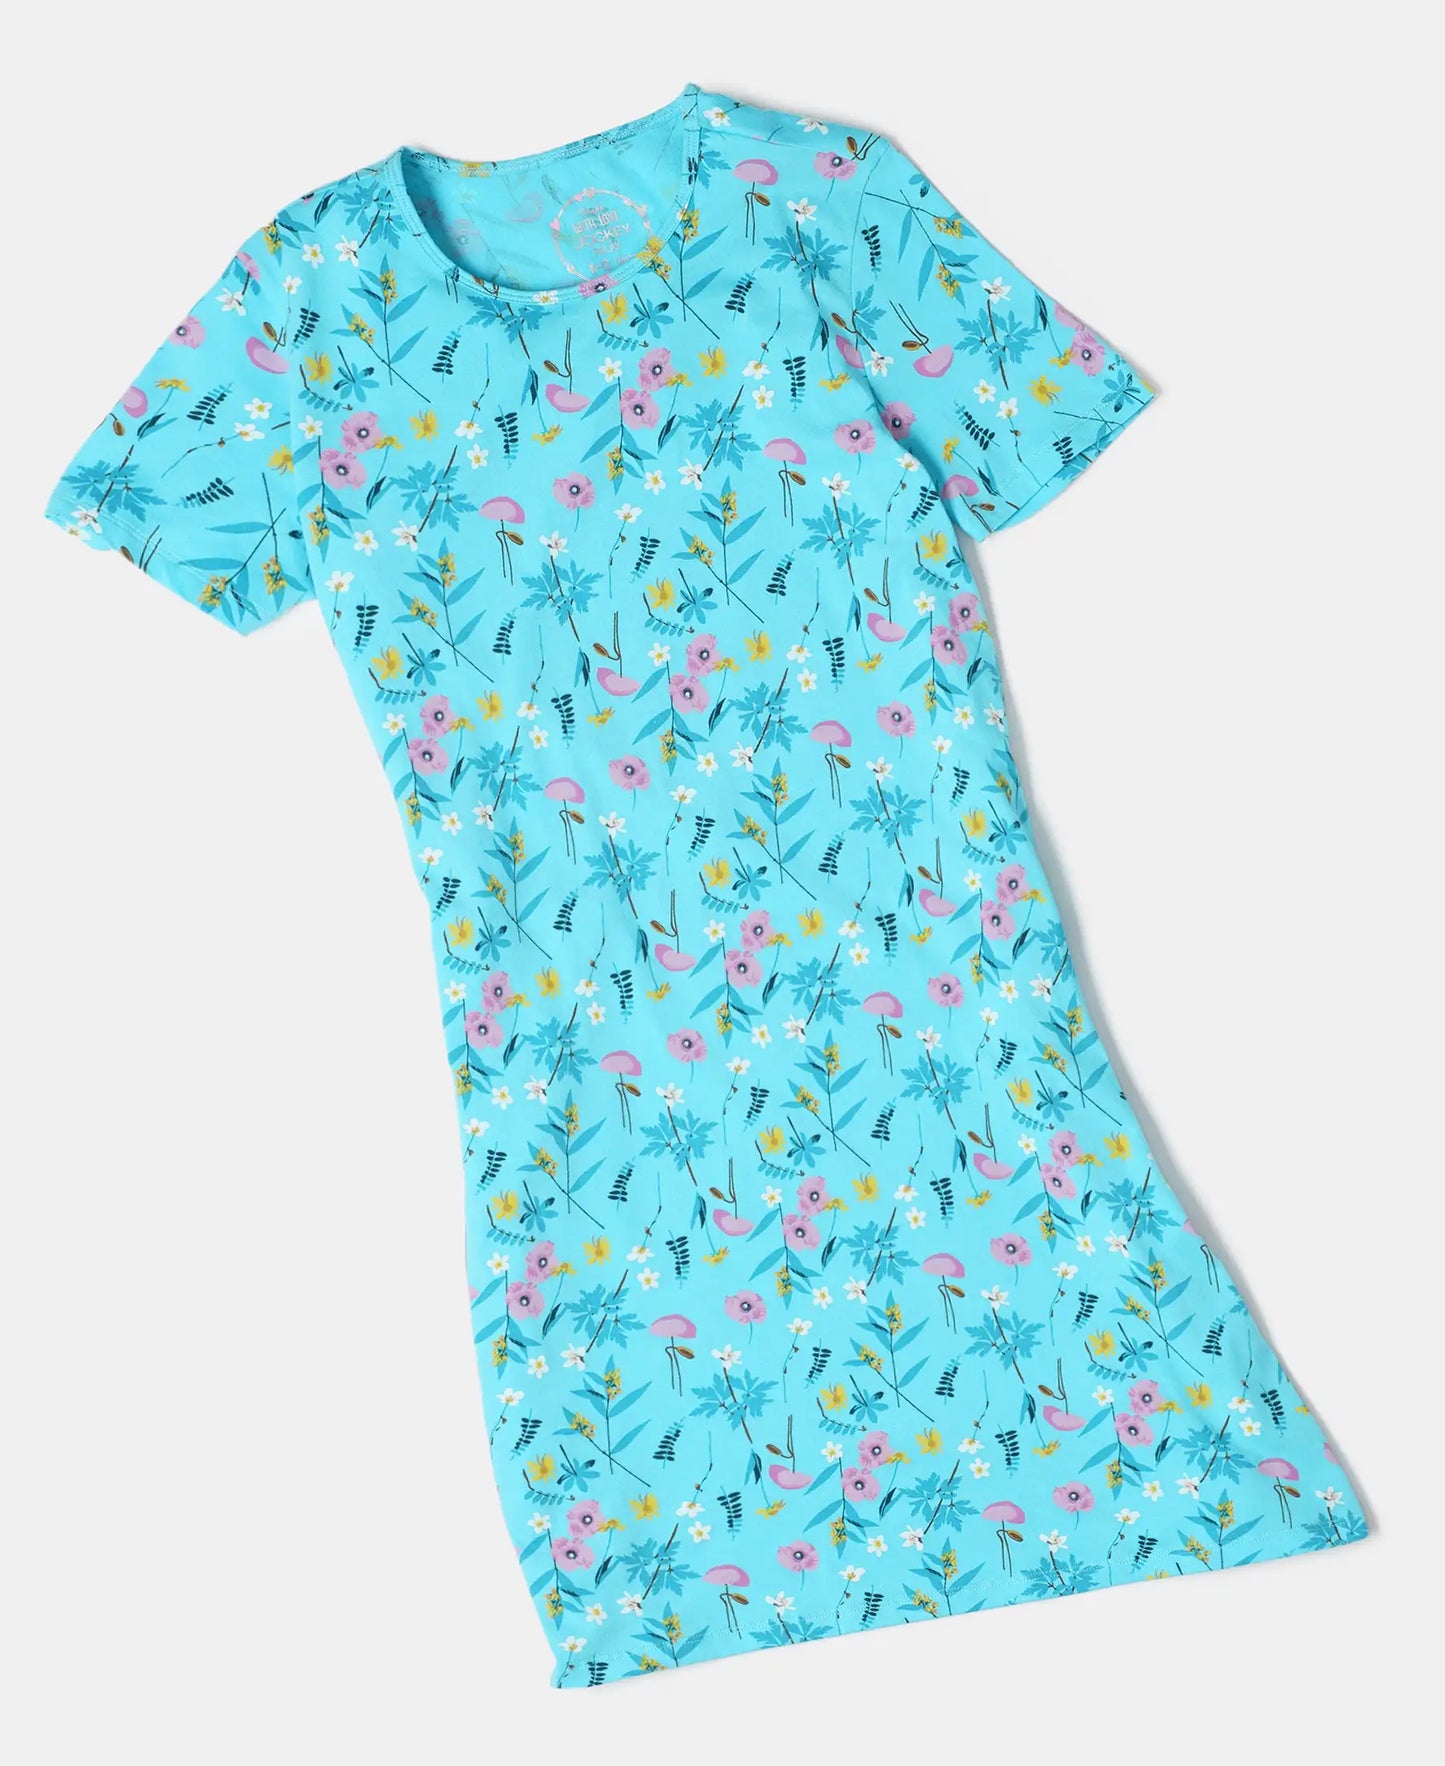 Super Combed Cotton Printed Dress with Matching Headband - Blue Curacao Printed-6